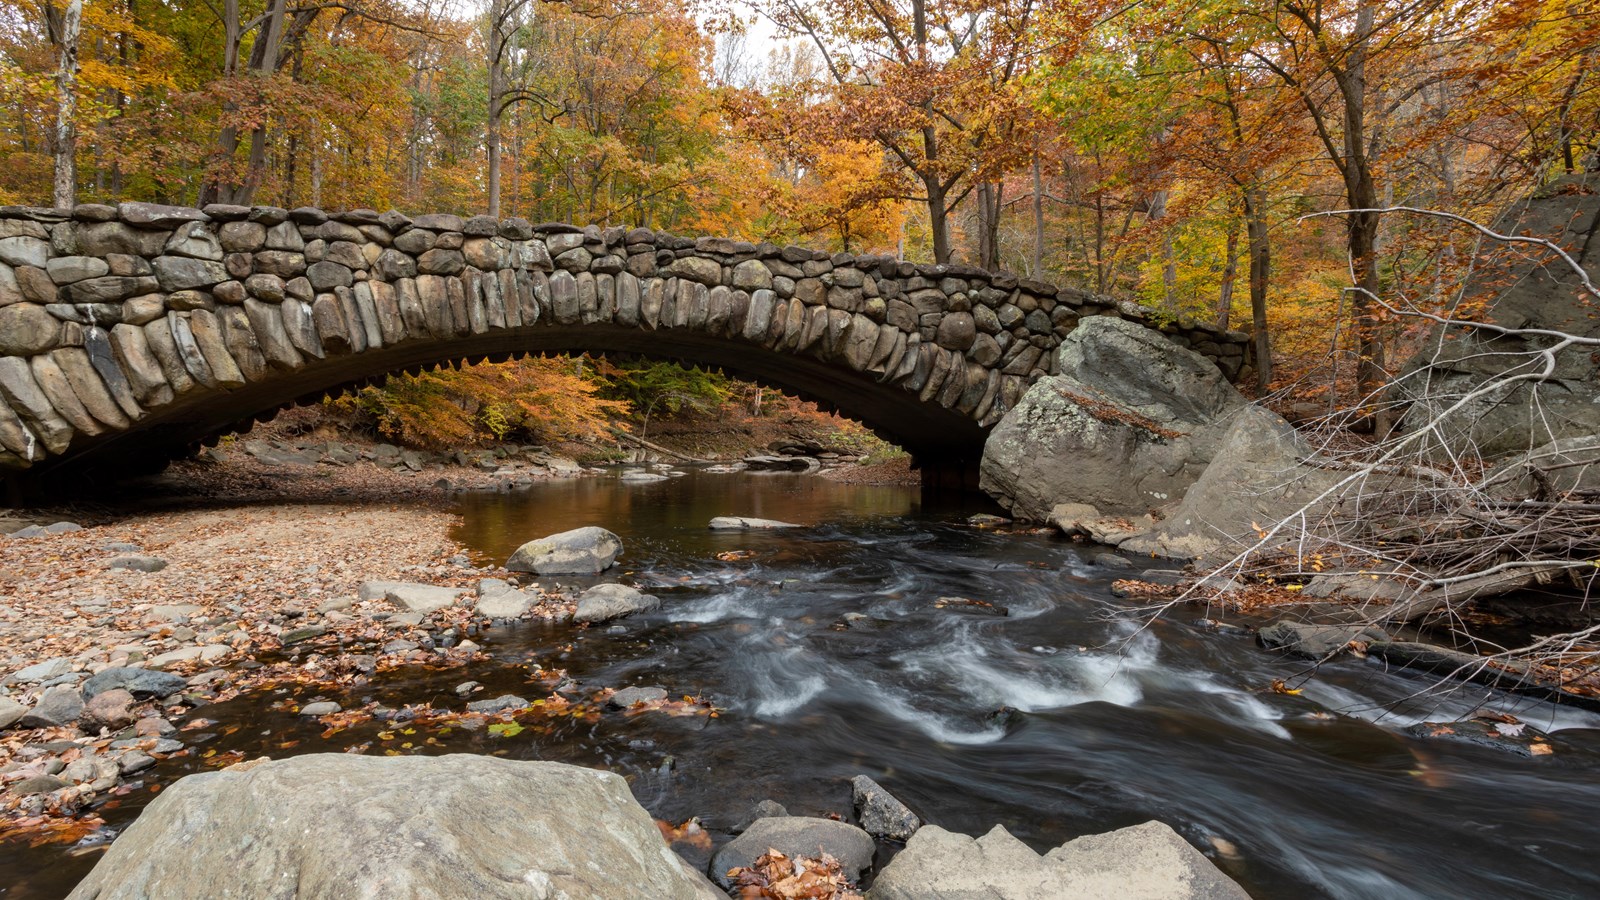 A stone bridge over a rushing river